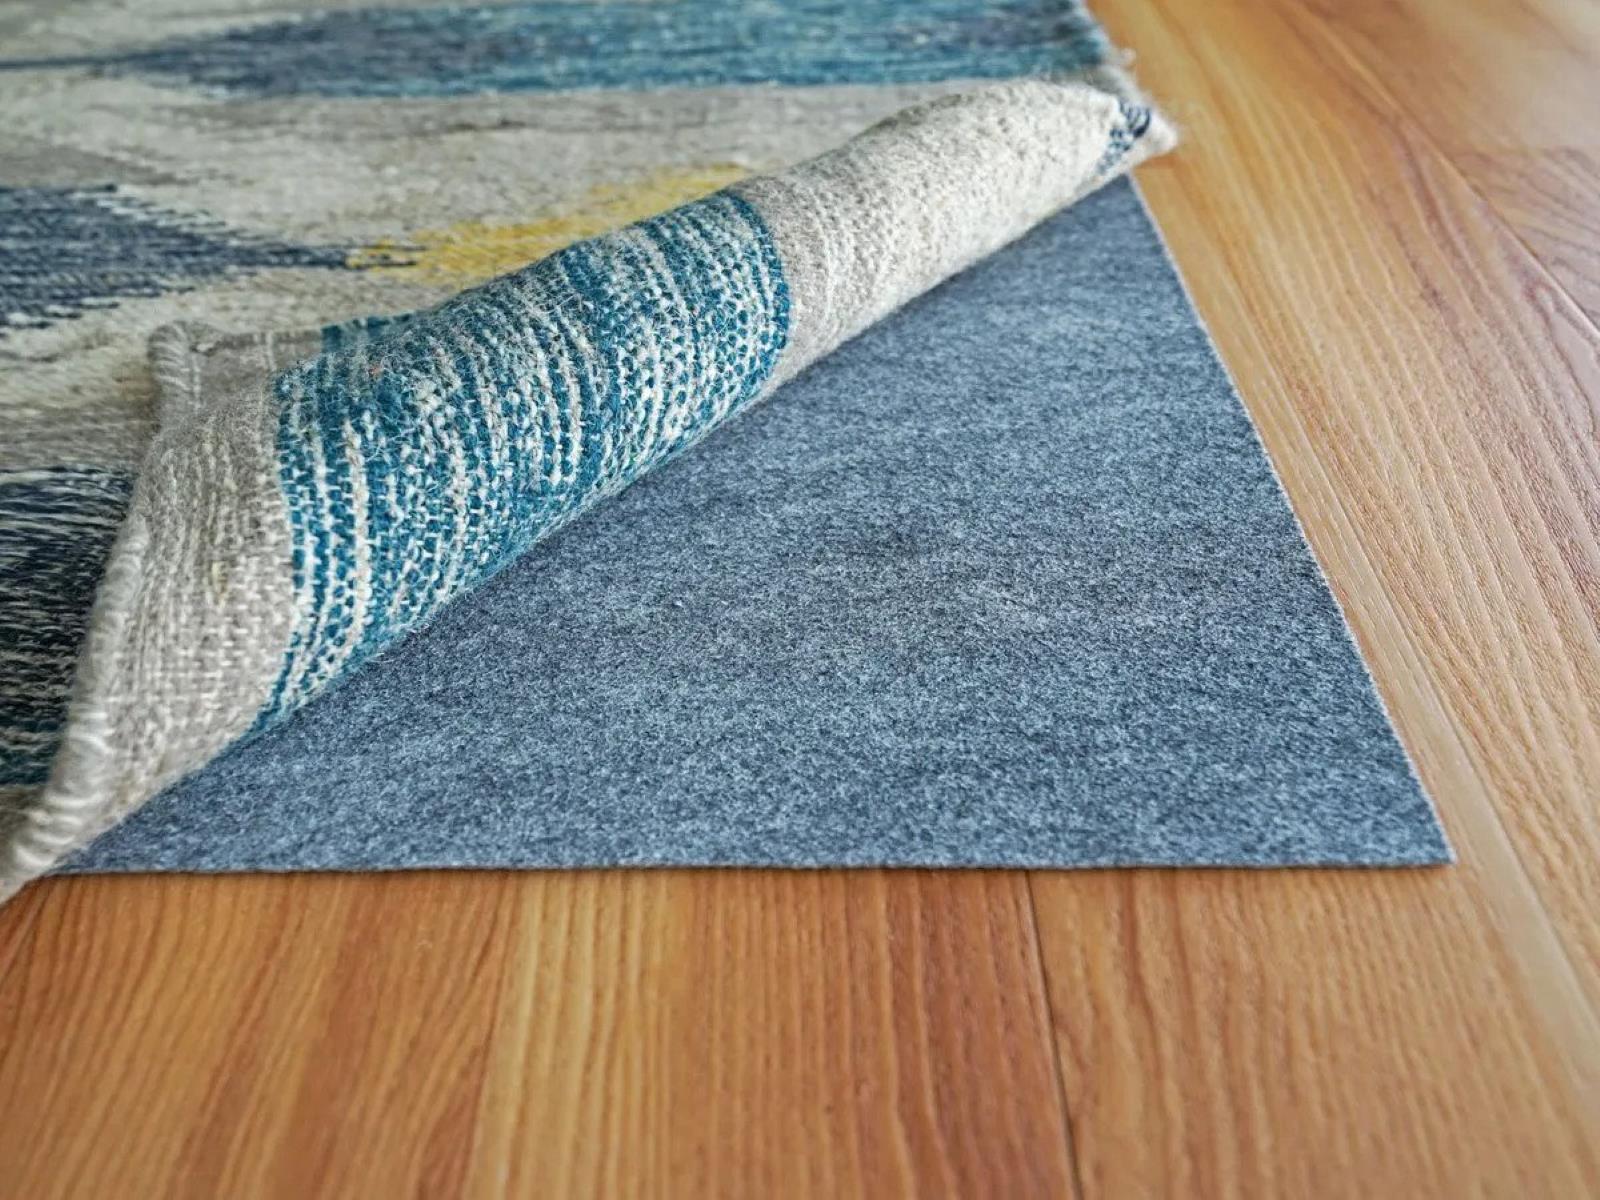 What Do You Put Under Rugs On Hardwood Floors